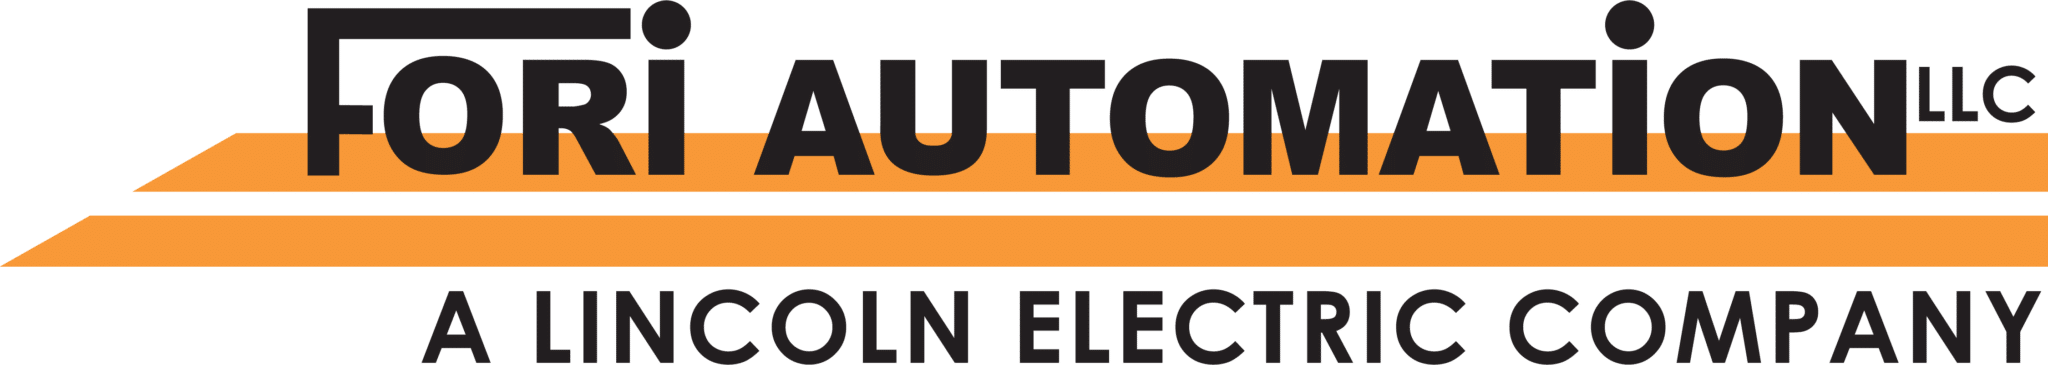 The Fori Automation, LLC, a Lincoln Electric company, logo in orange and black